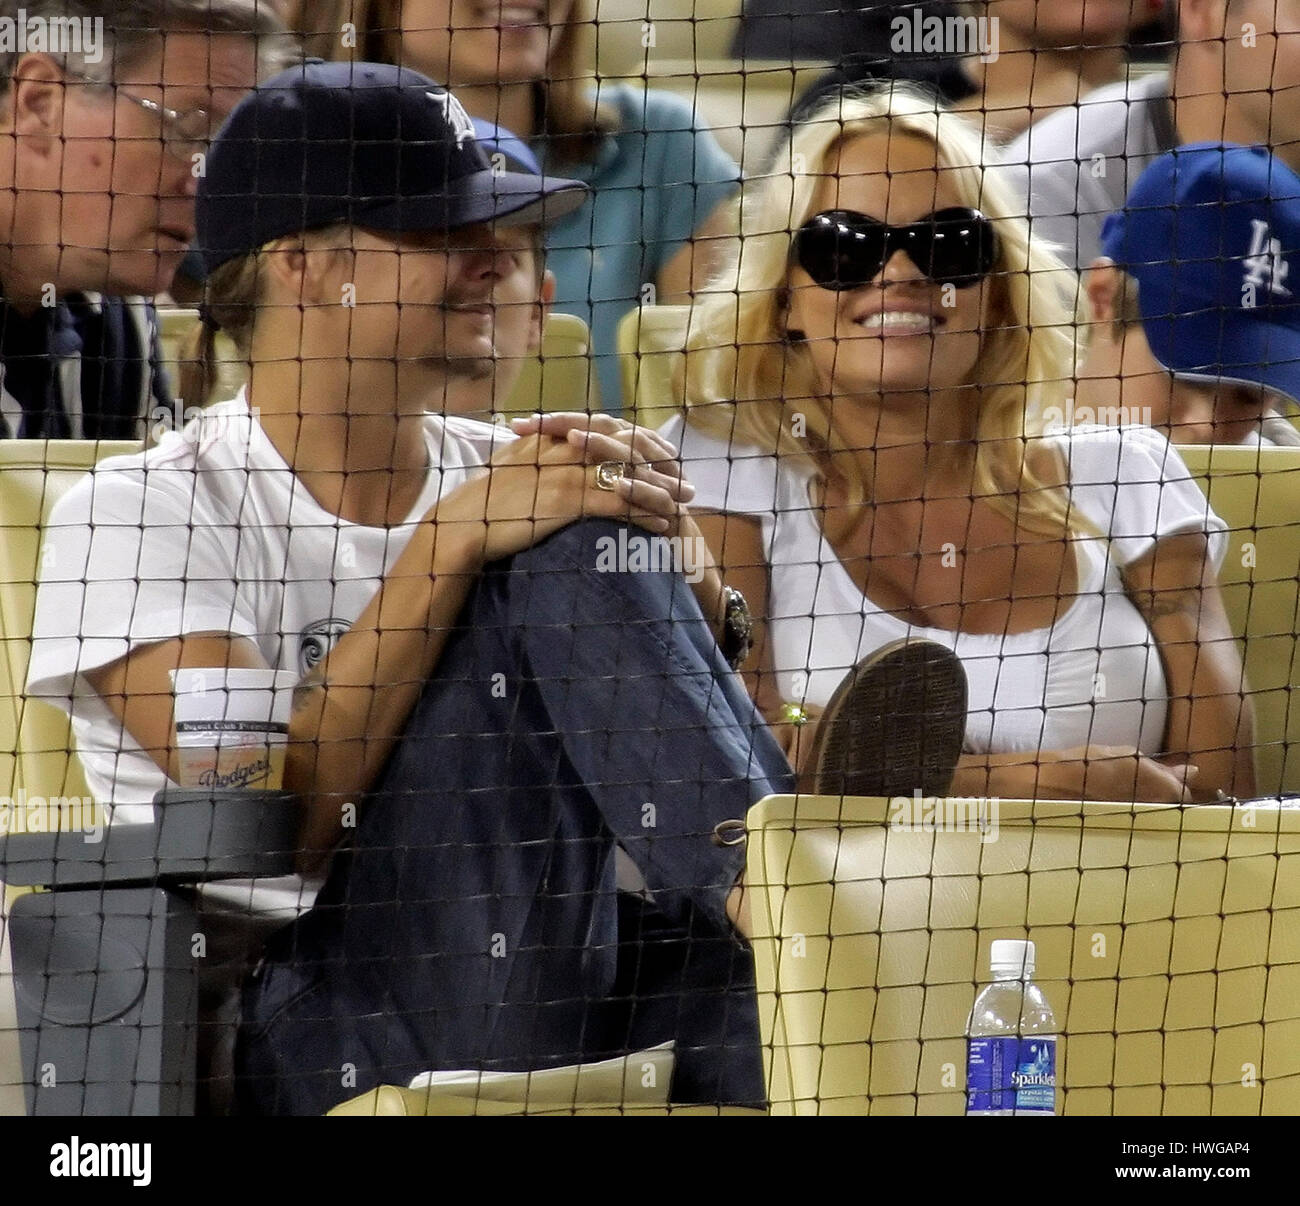 Musician Kid Rock, left, and his wife, Pamela Anderson watch the Cincinnati Reds play the Los Angeles Dodgers in a baseball game in Los Angeles on Monday, Aug. 28, 2006. Photo by Francis Specker Stock Photo